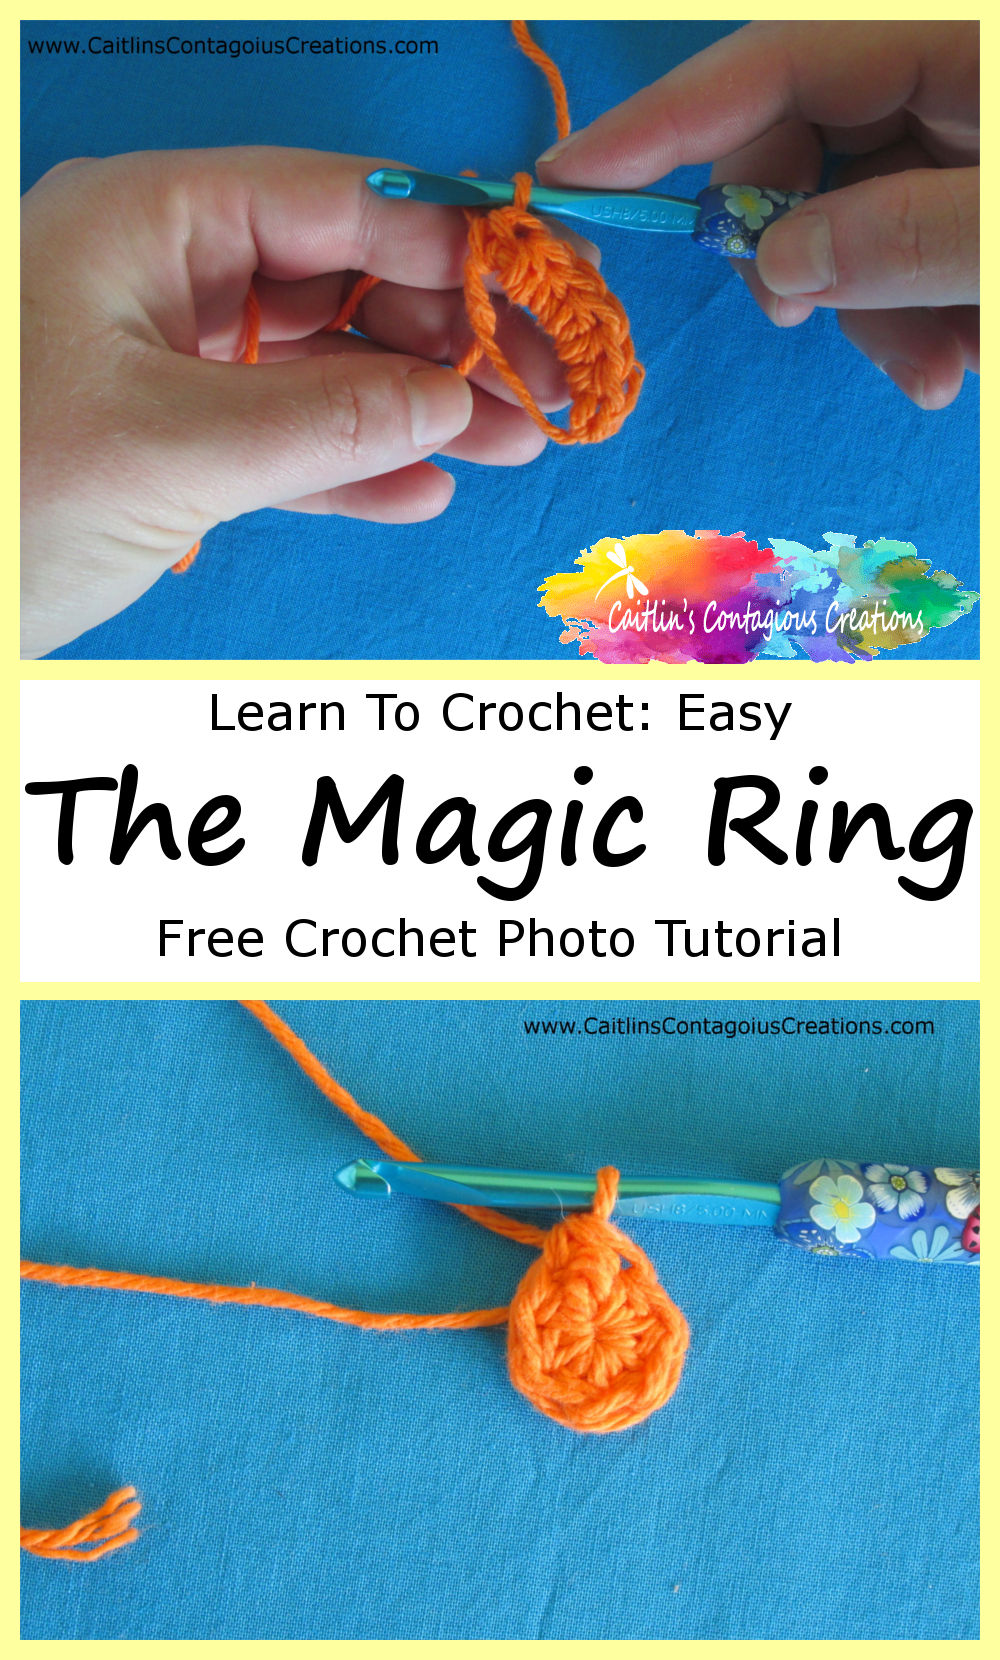 pinterest image to share with completed magic rings and text overlay